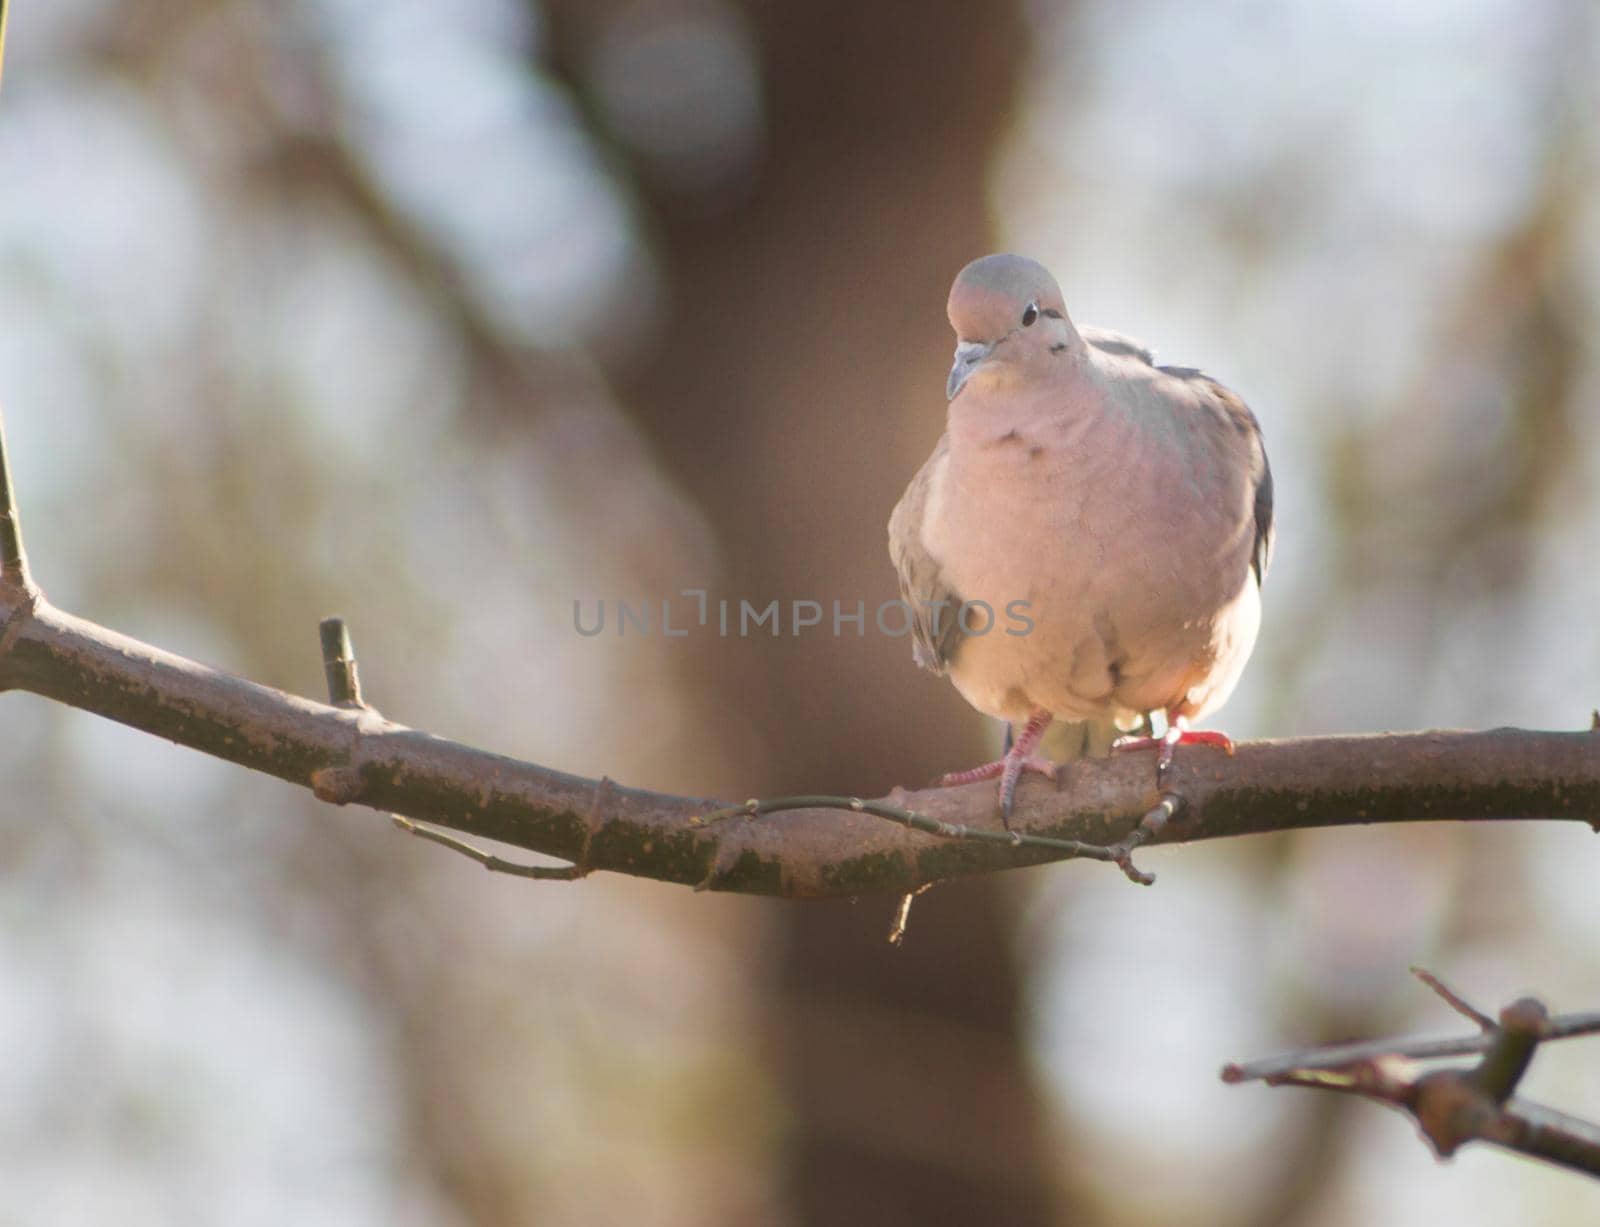 a pigeon perched on the branch in its natural habitat in south america